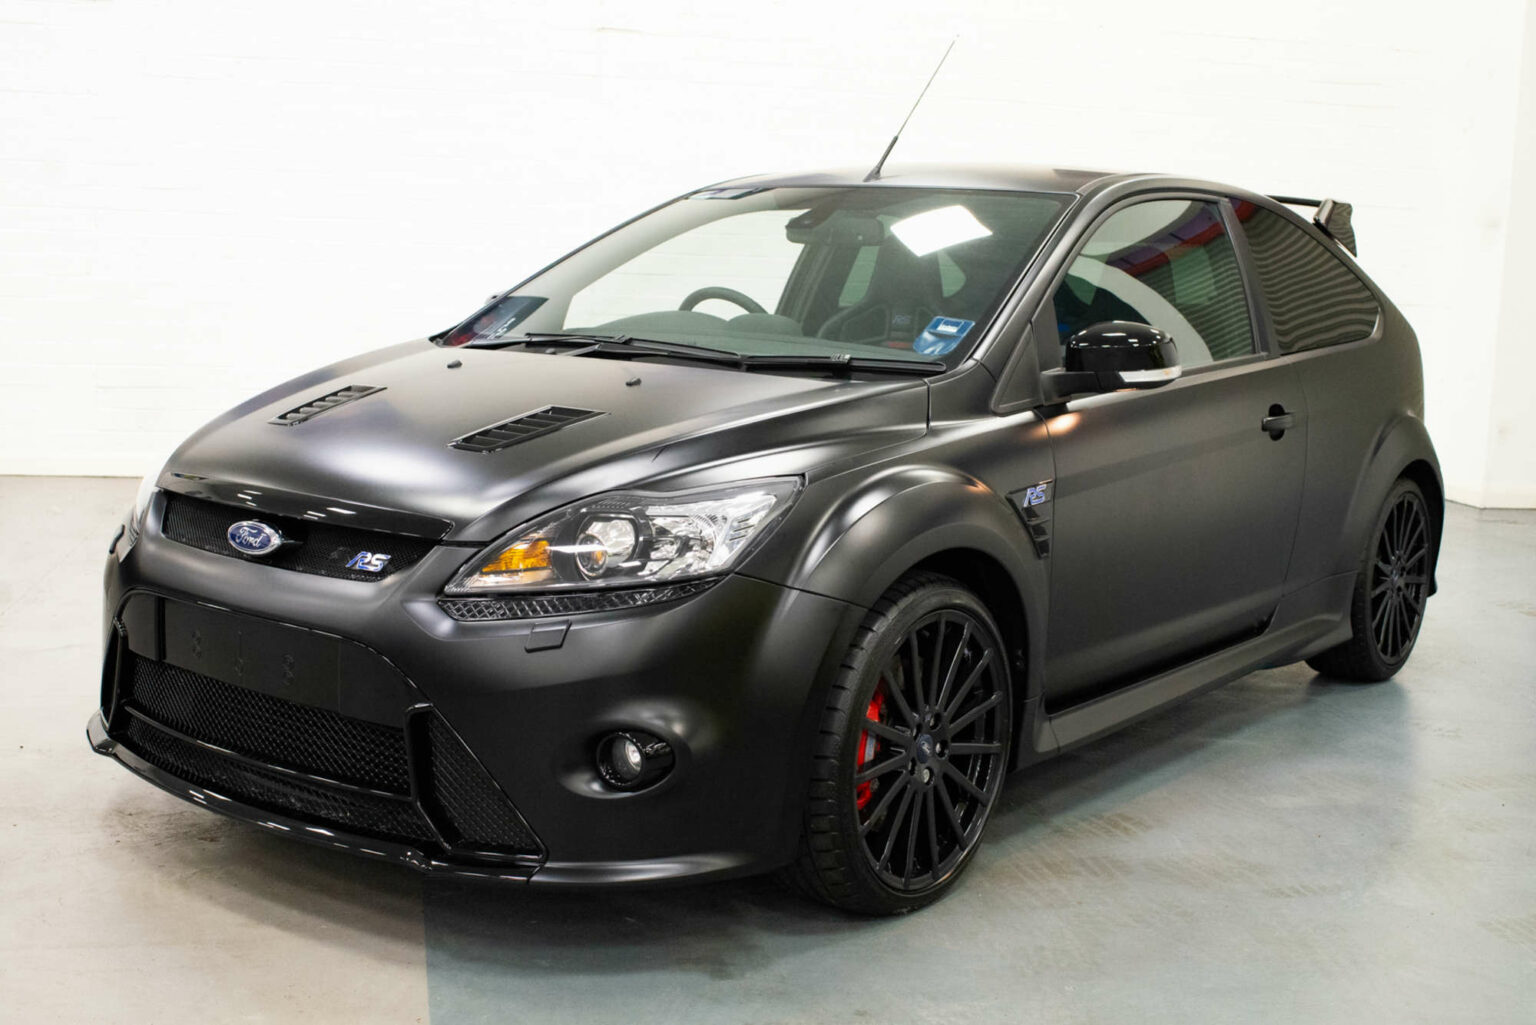 10-2010-Ford-Focus-RS500-1536x1025